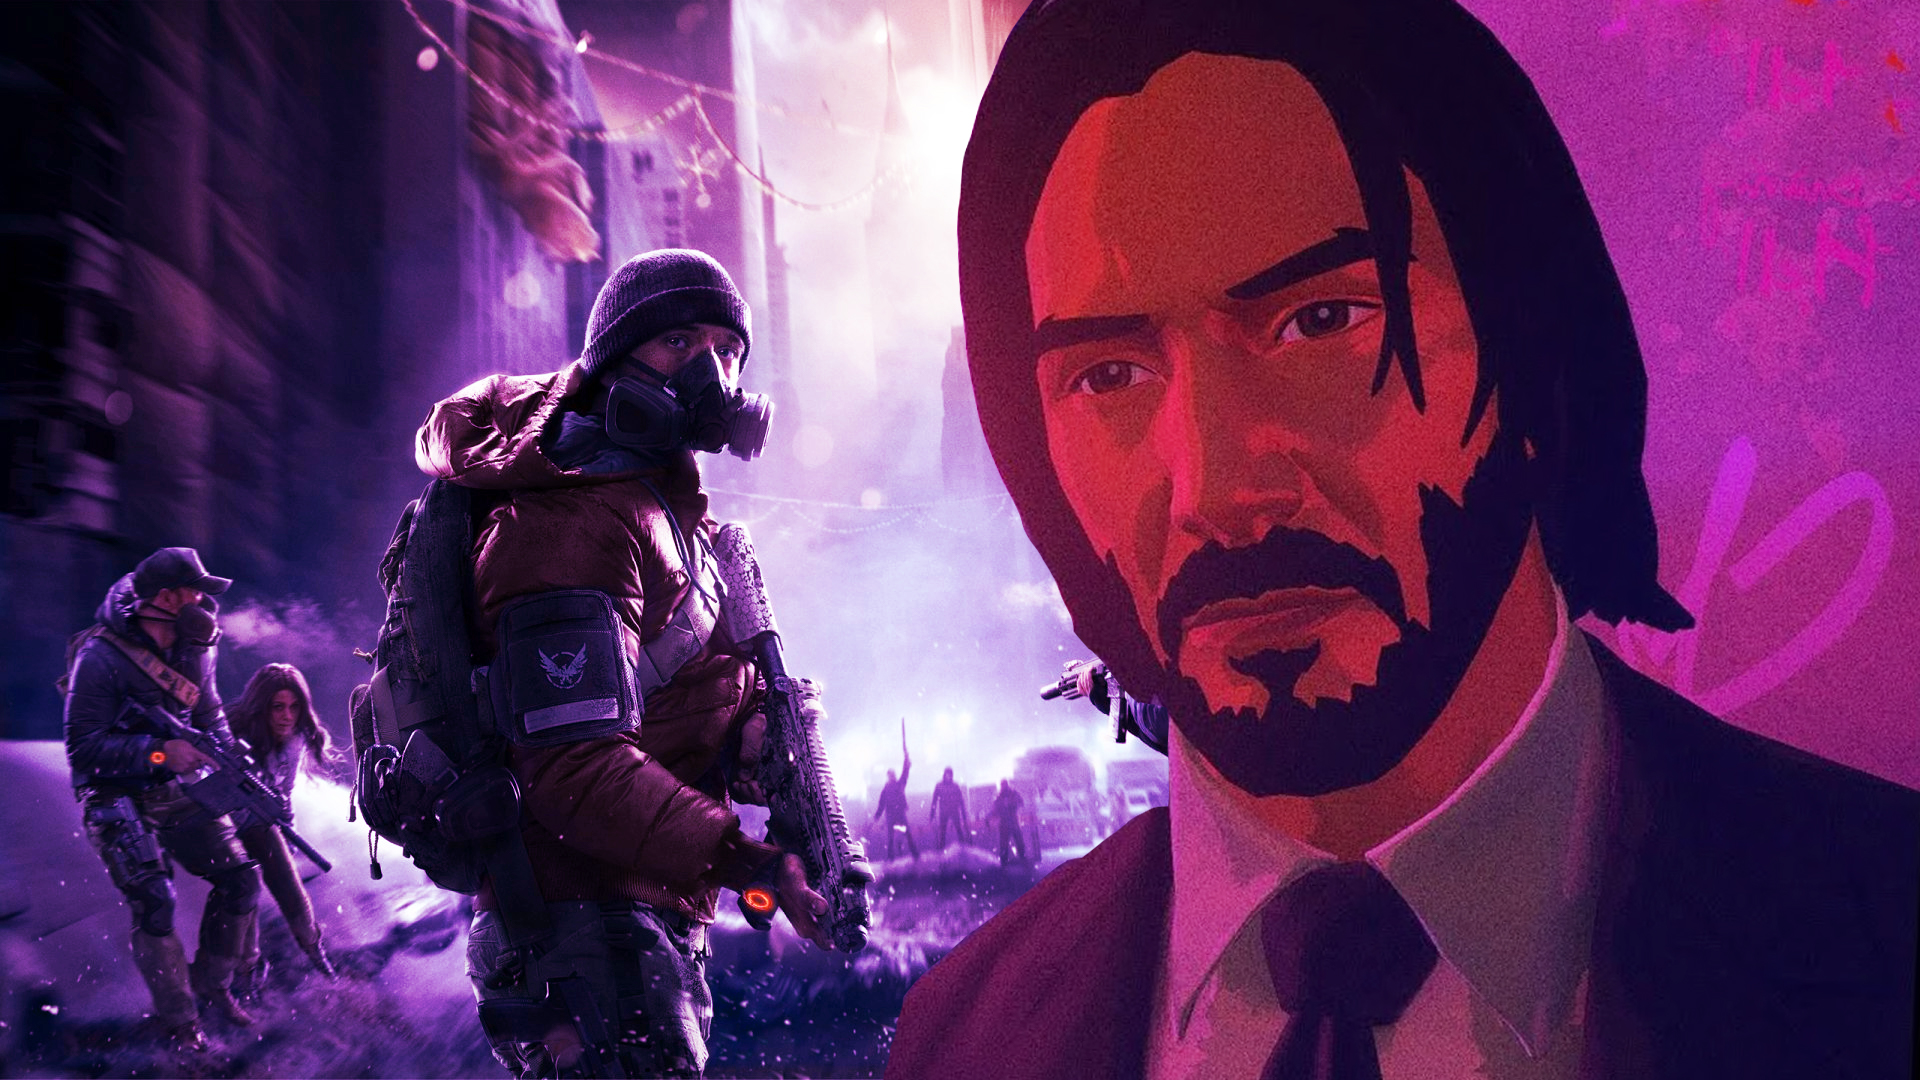 The new John Wick game needs to take notes from The Division The Loadout